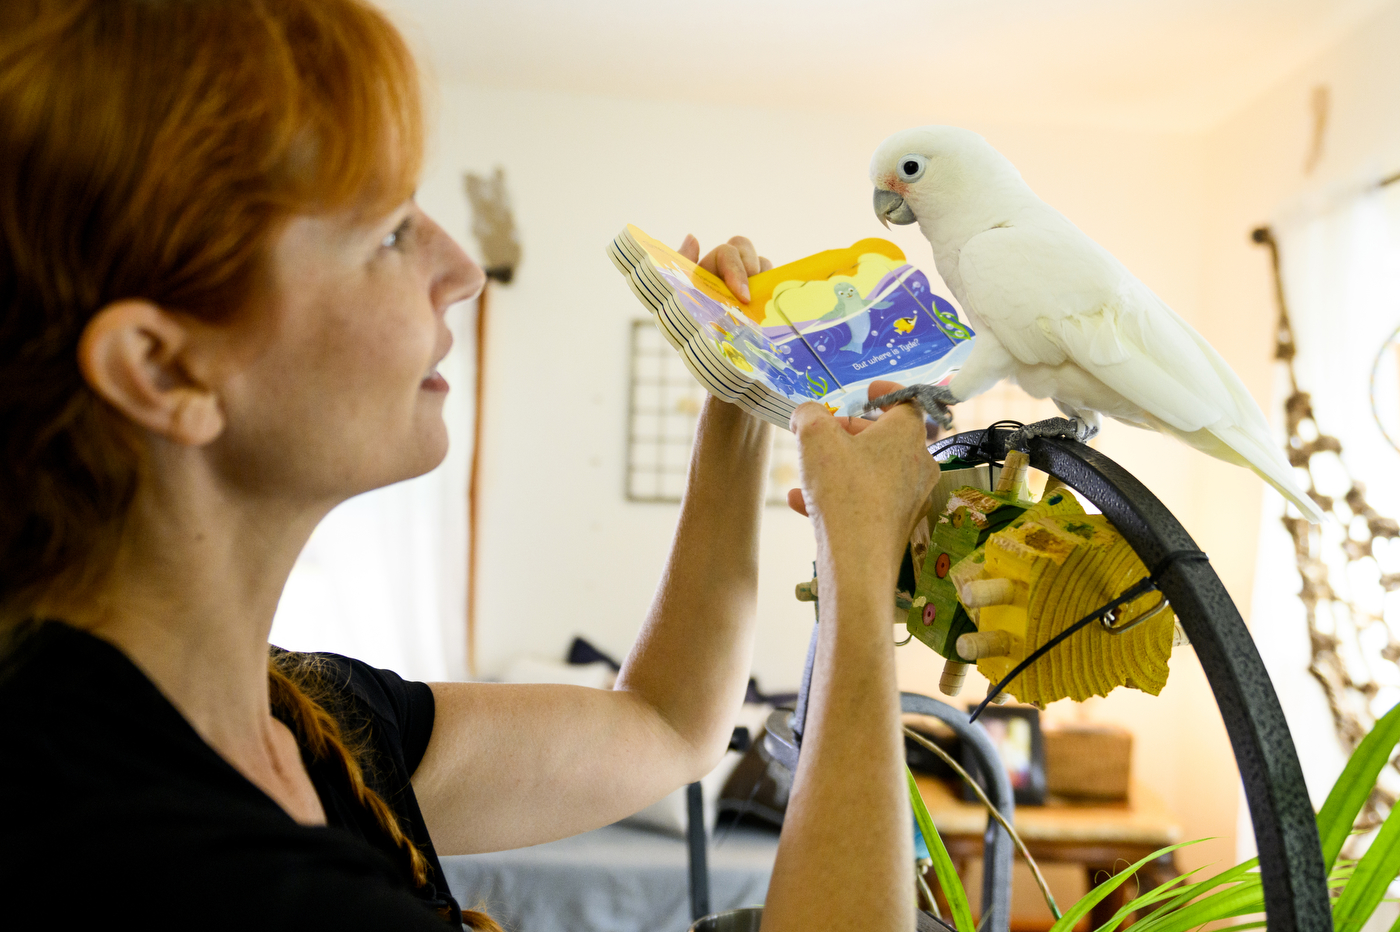 Jennifer Cunha interacting with a parrot